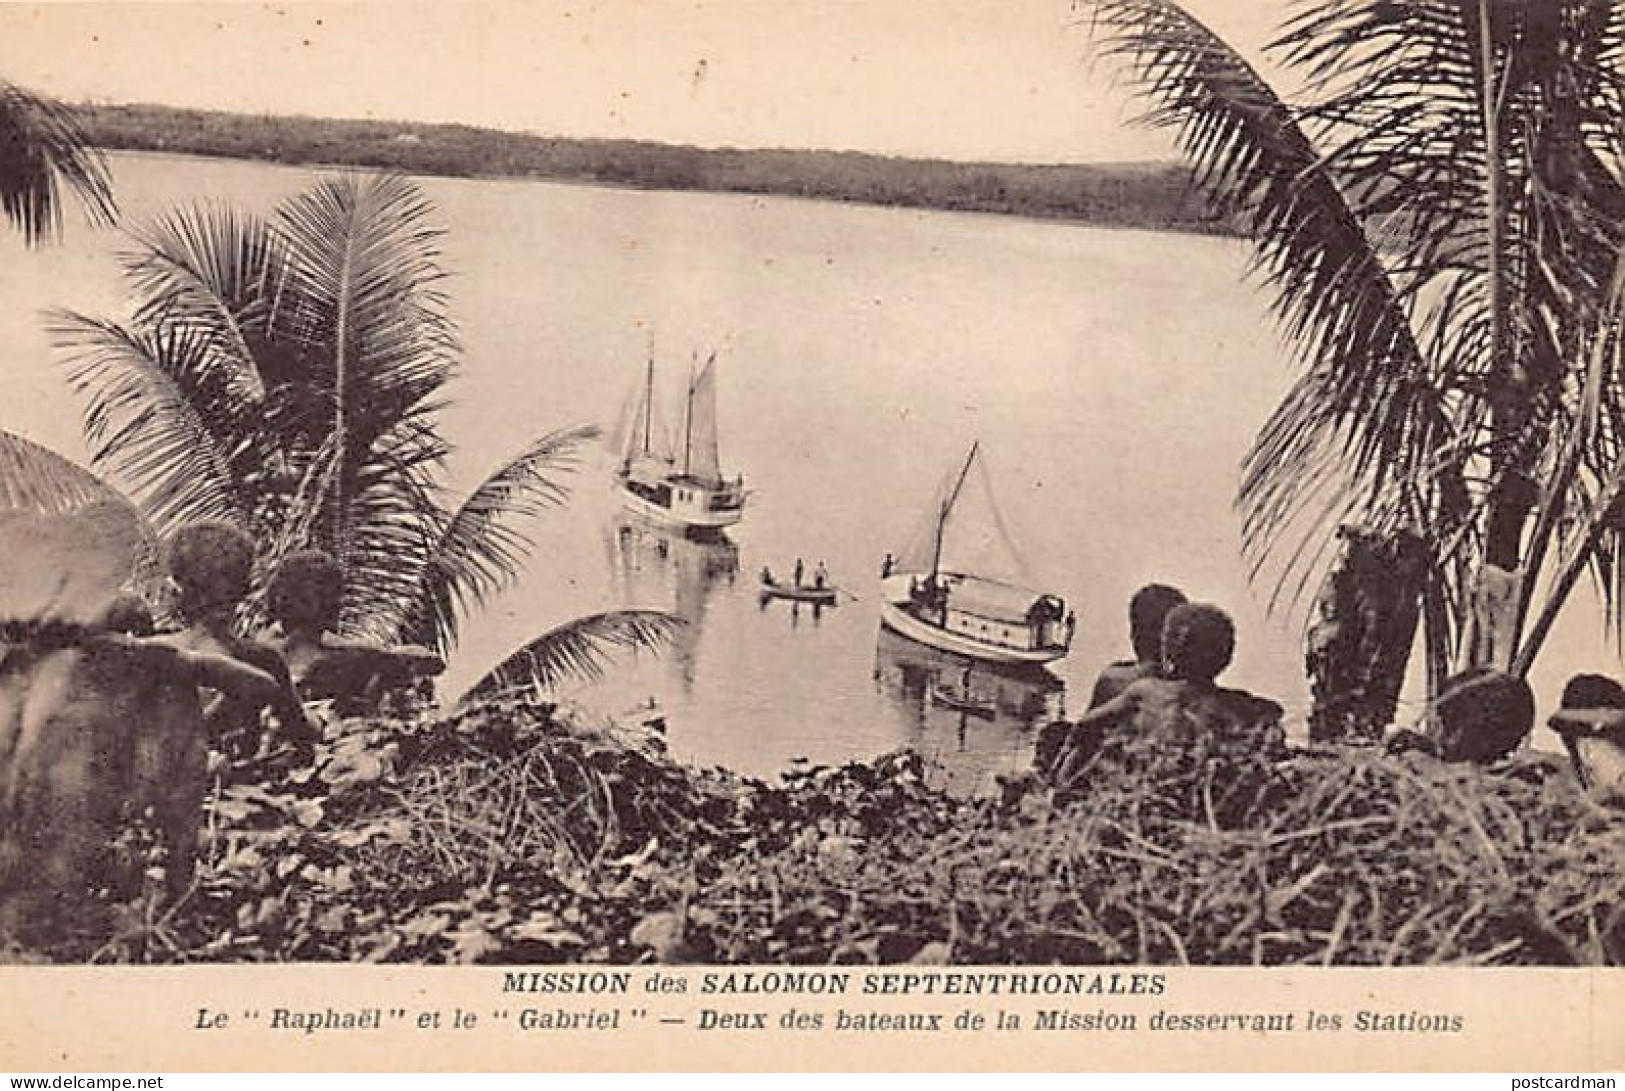 Papua New Guinea - The Raphaël And The Gabriel, Two Of The Mission's Boats Serving The Stations - Publ. Mission Des Salo - Papouasie-Nouvelle-Guinée